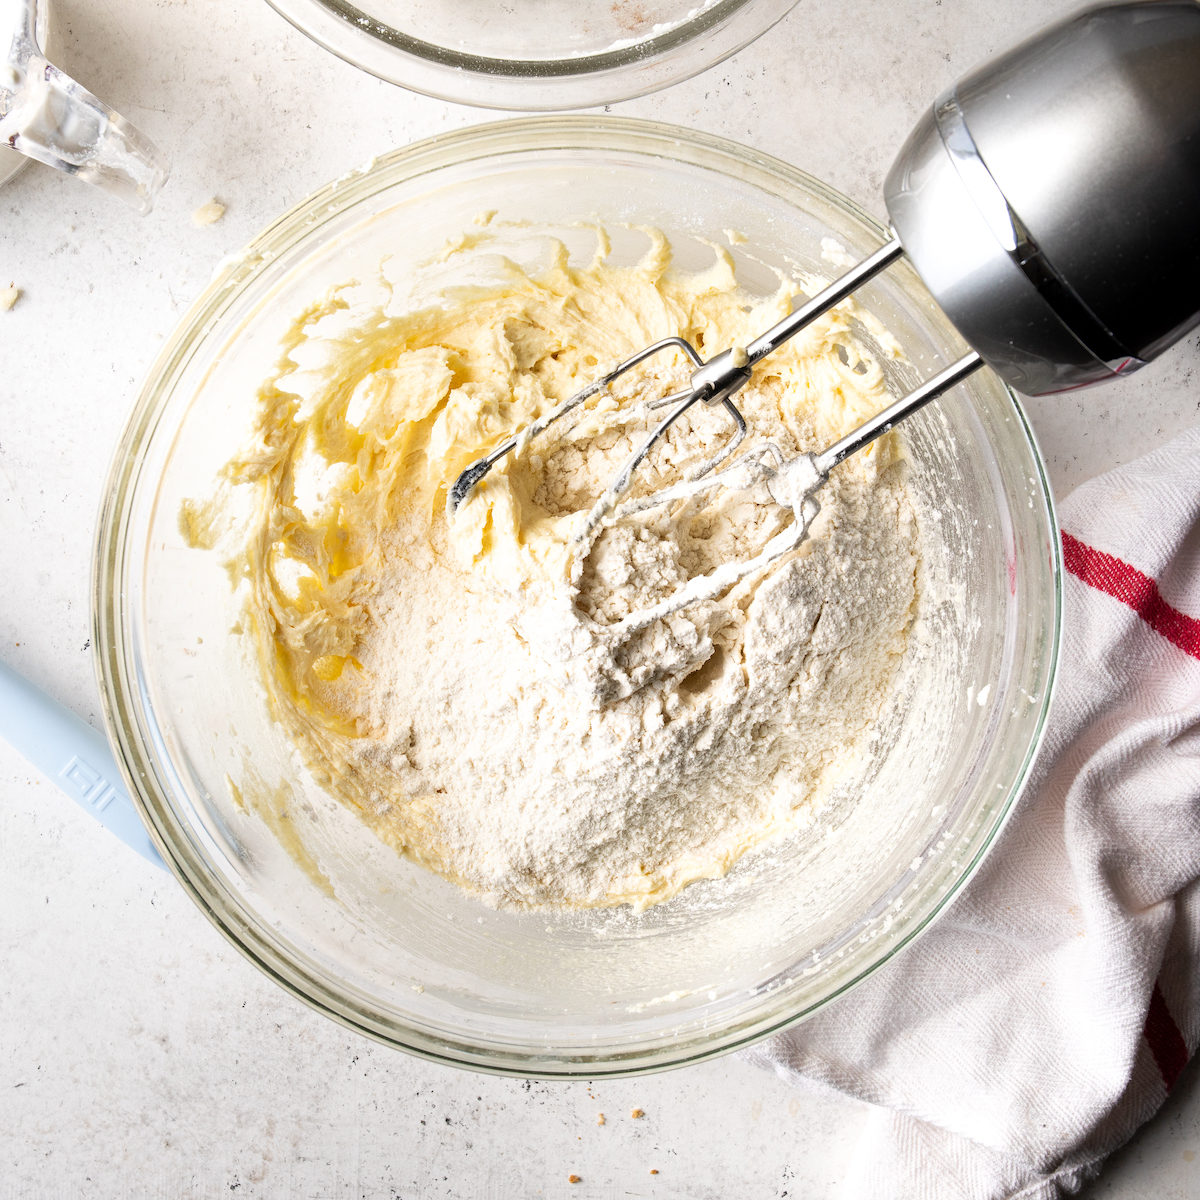 Flour getting mixed into cake batter with a mixer.